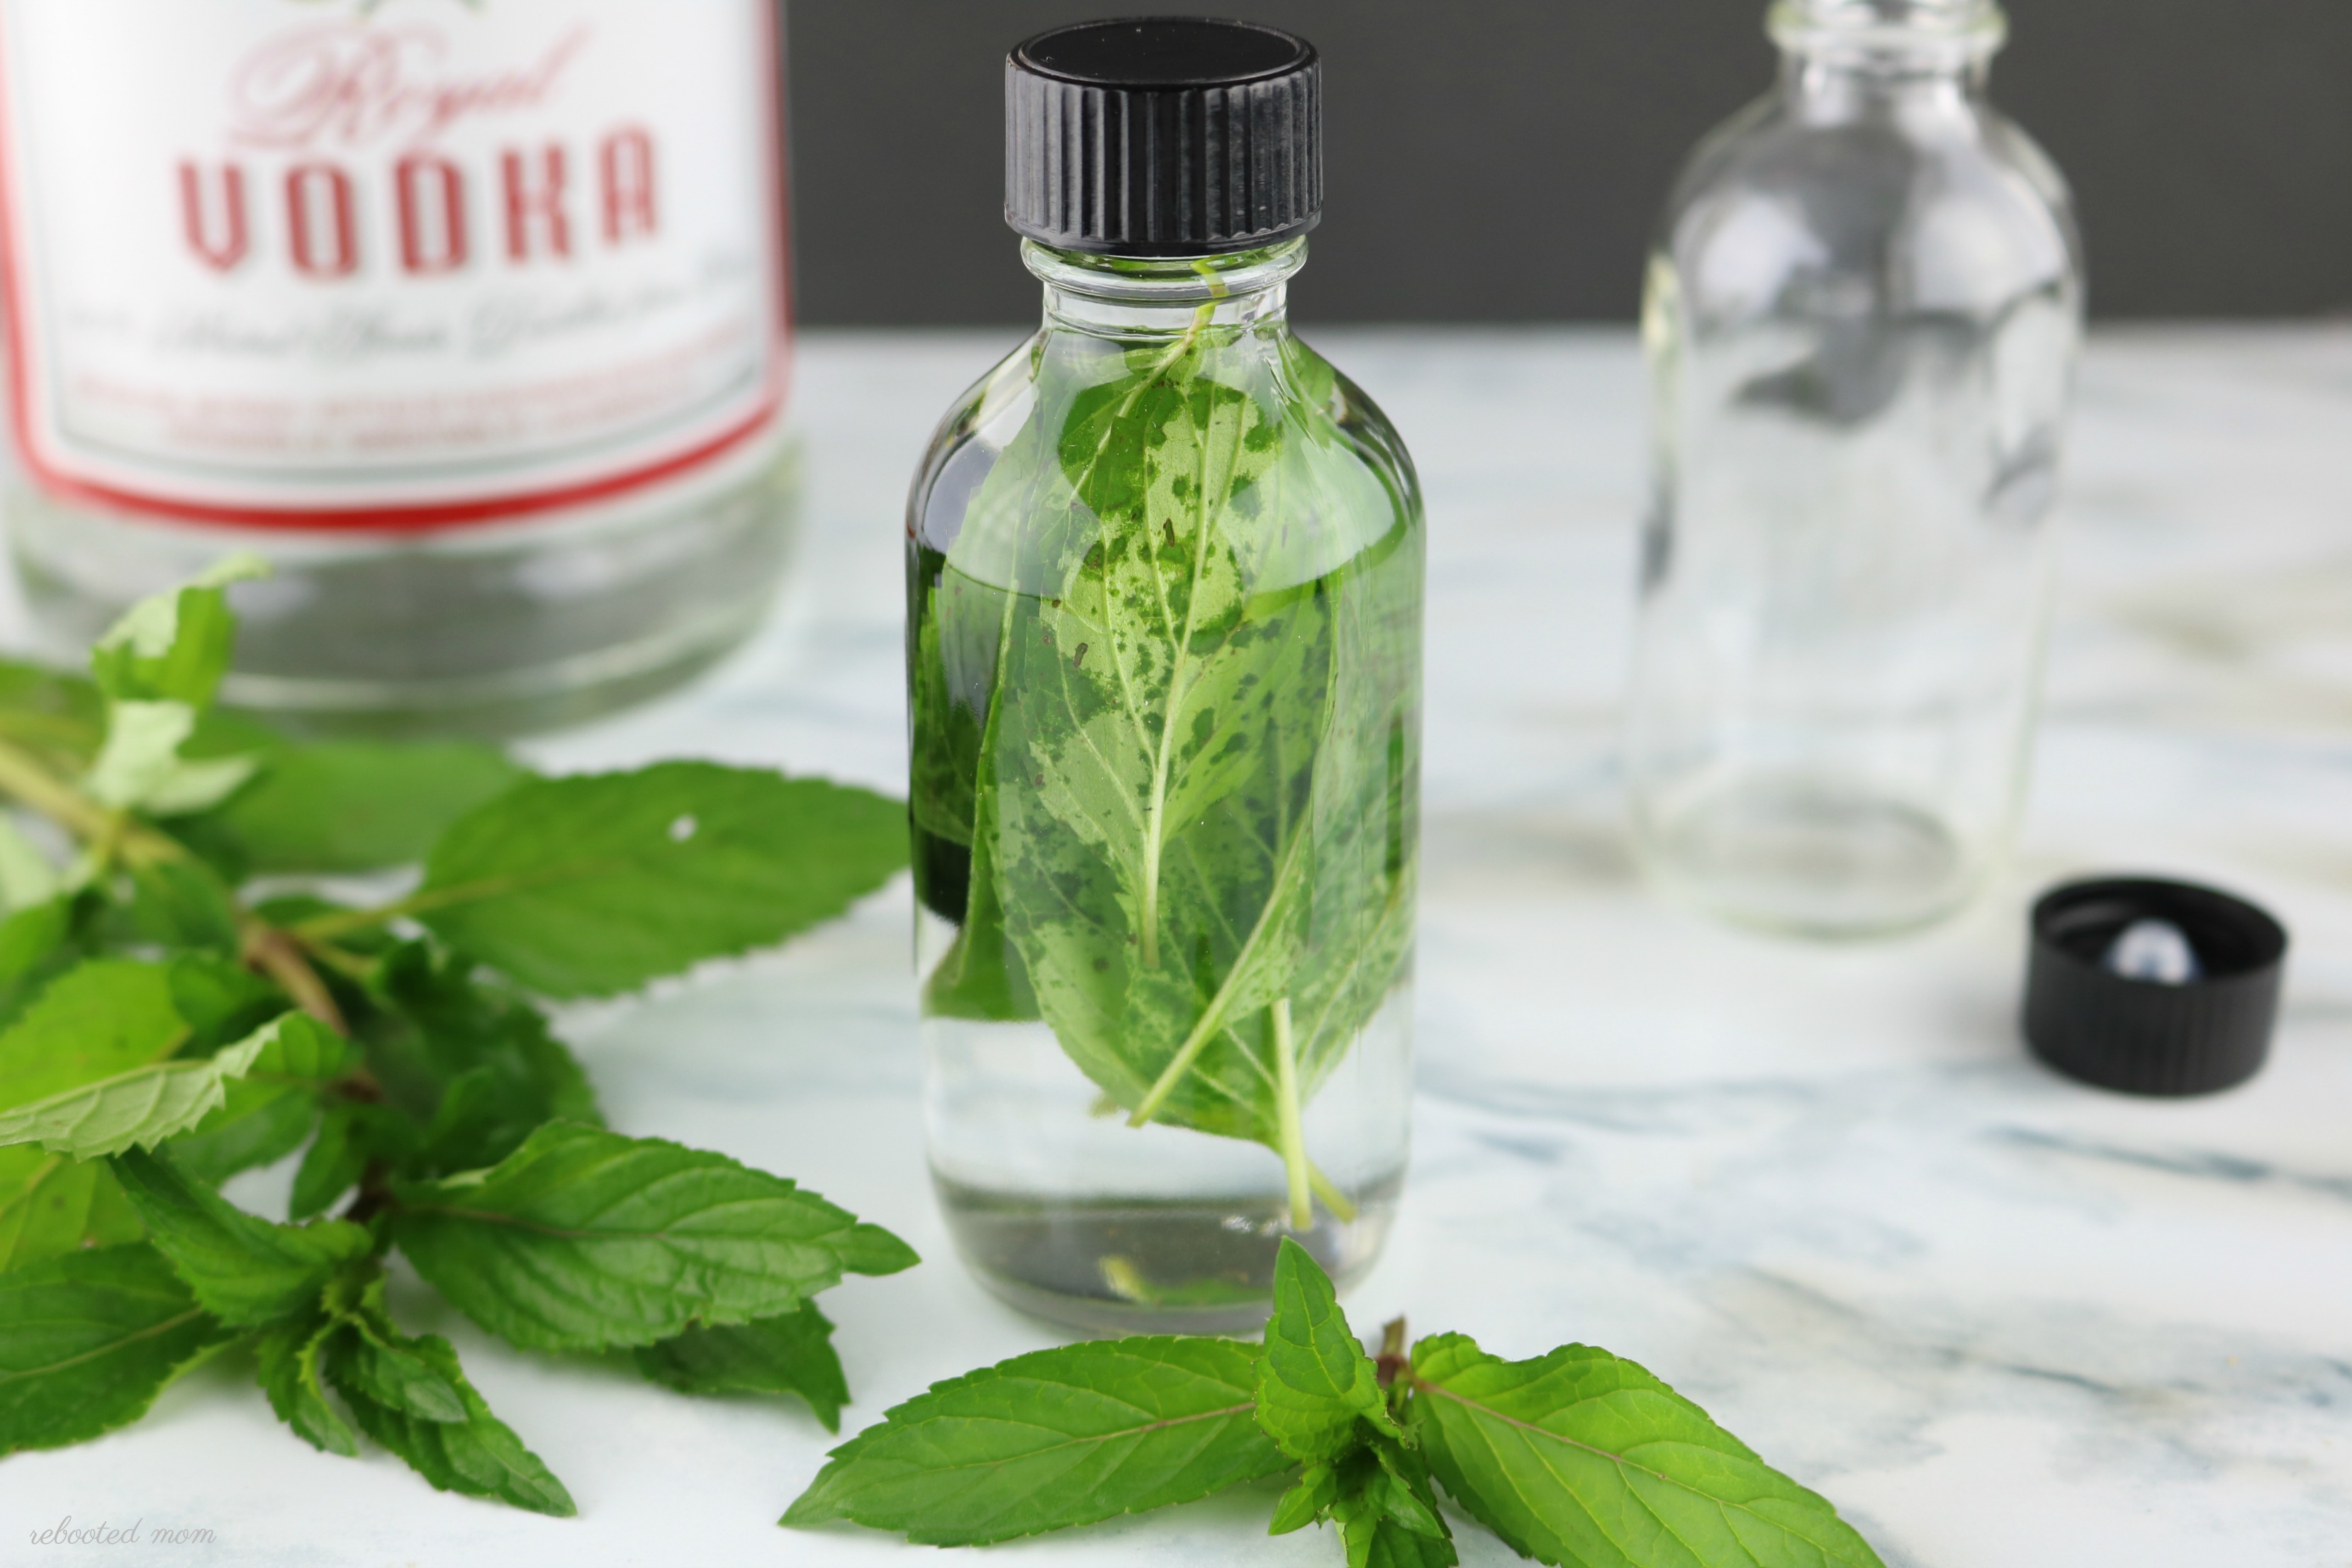 Homemade Mint Extract